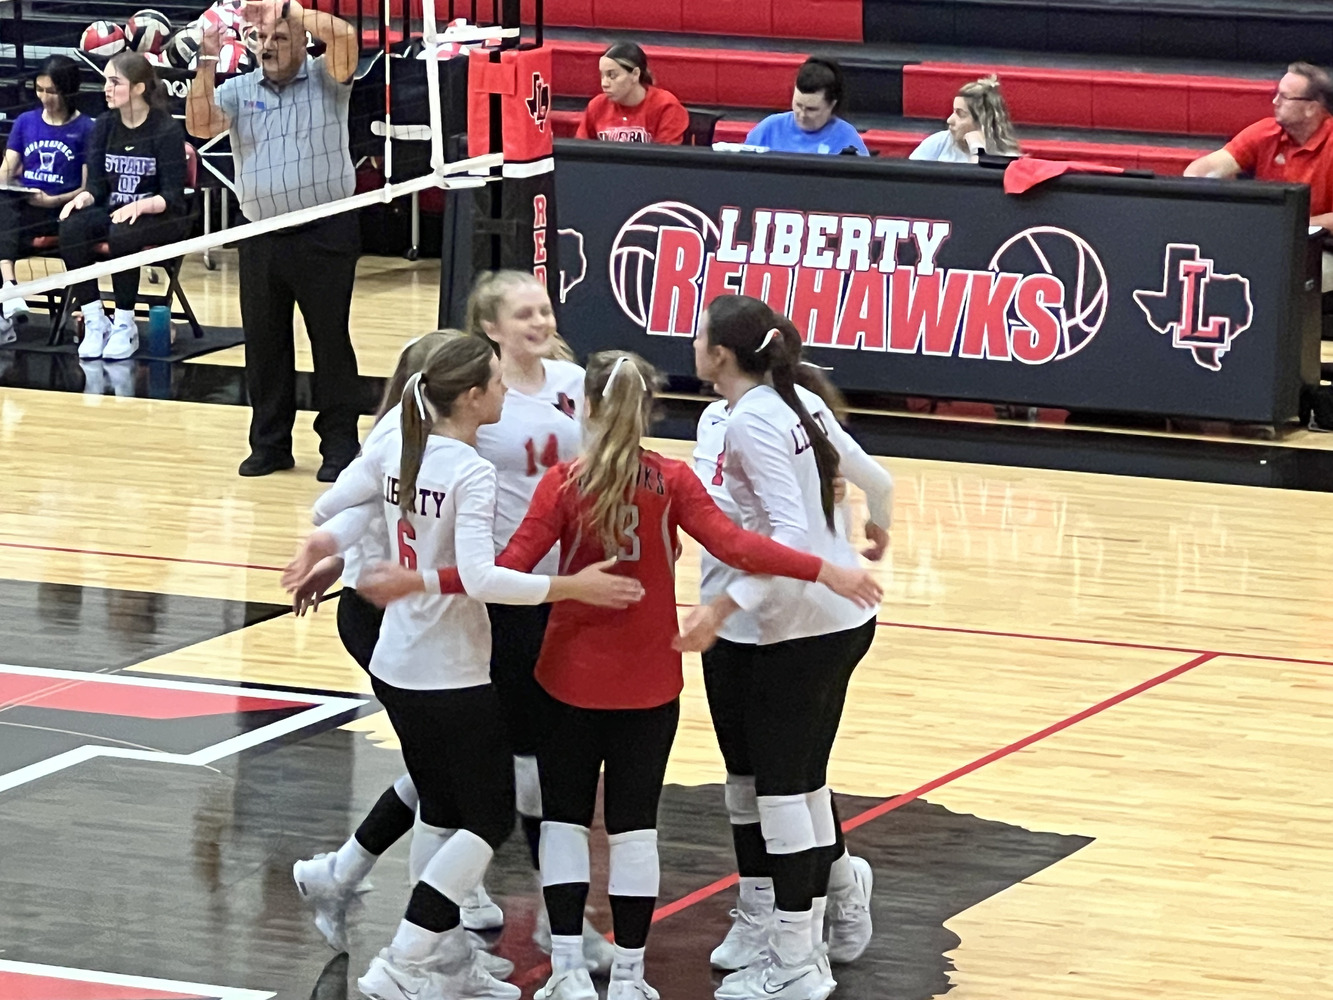 Volleyball continues to hold first place title in District 10-5A after a 3-0 sweep against Walnut Grove. 
“We are really happy with the outcome, we are proud of ourselves for building on our wins,” head coach Eighmy Dobbins said.